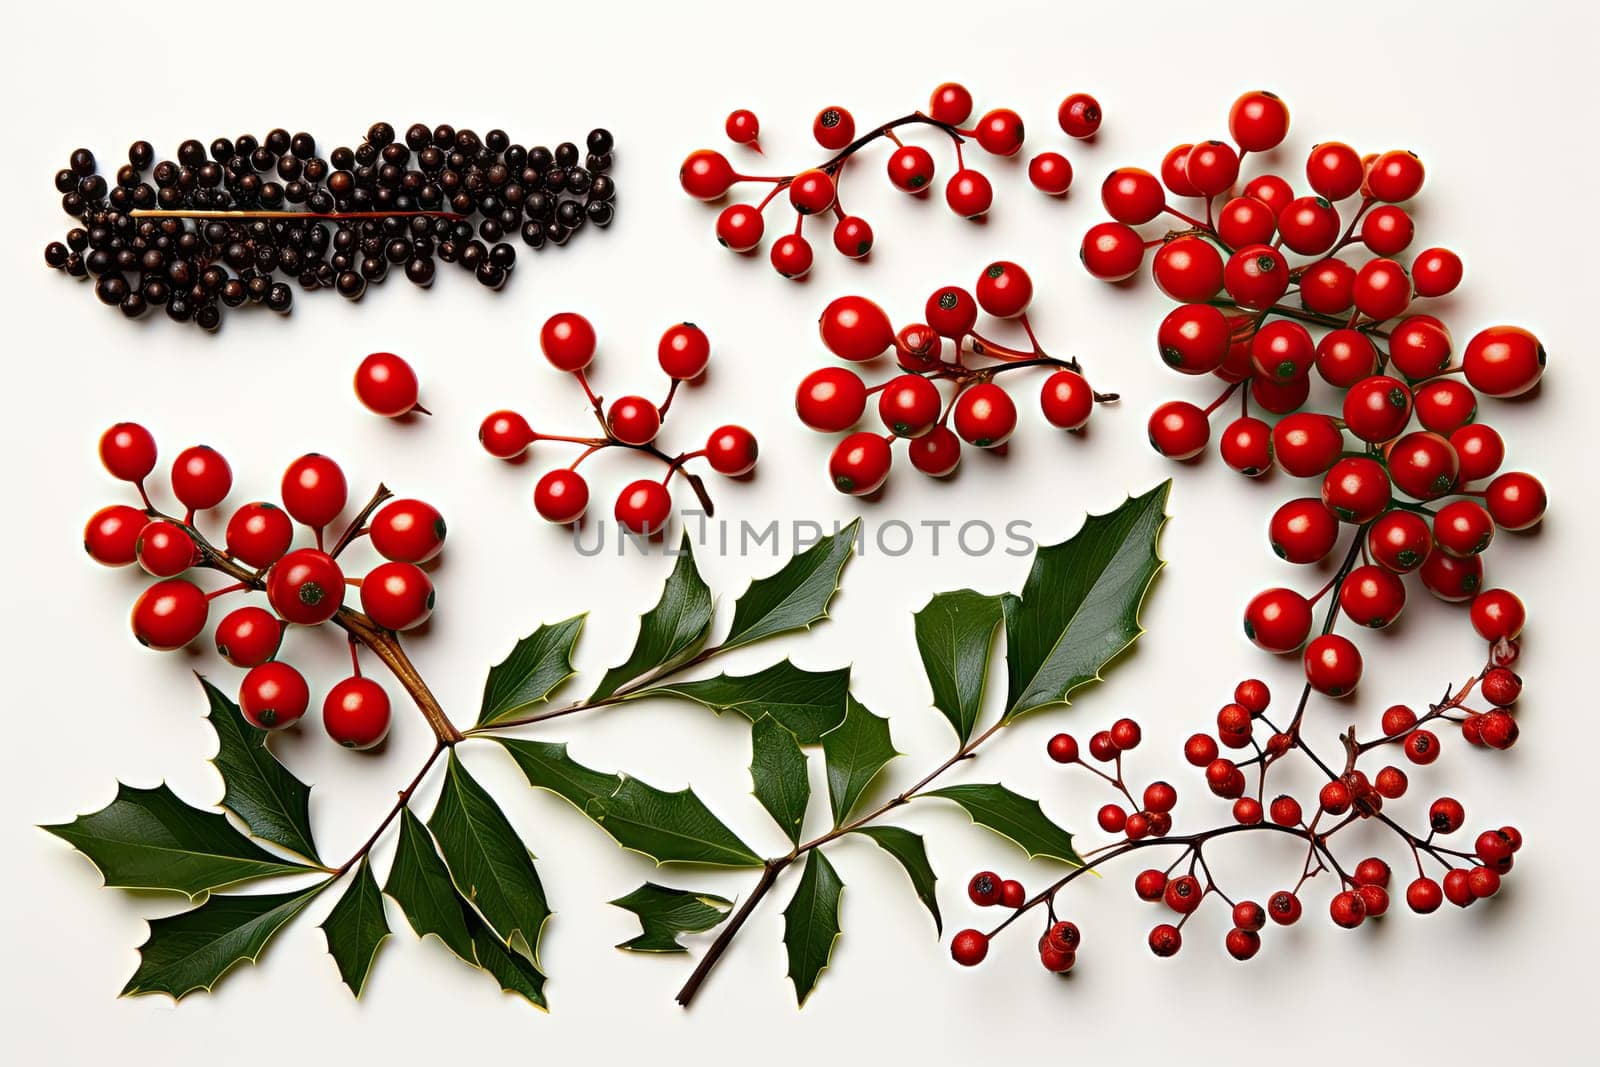 A group of berries and leaves on a white surface by golibtolibov